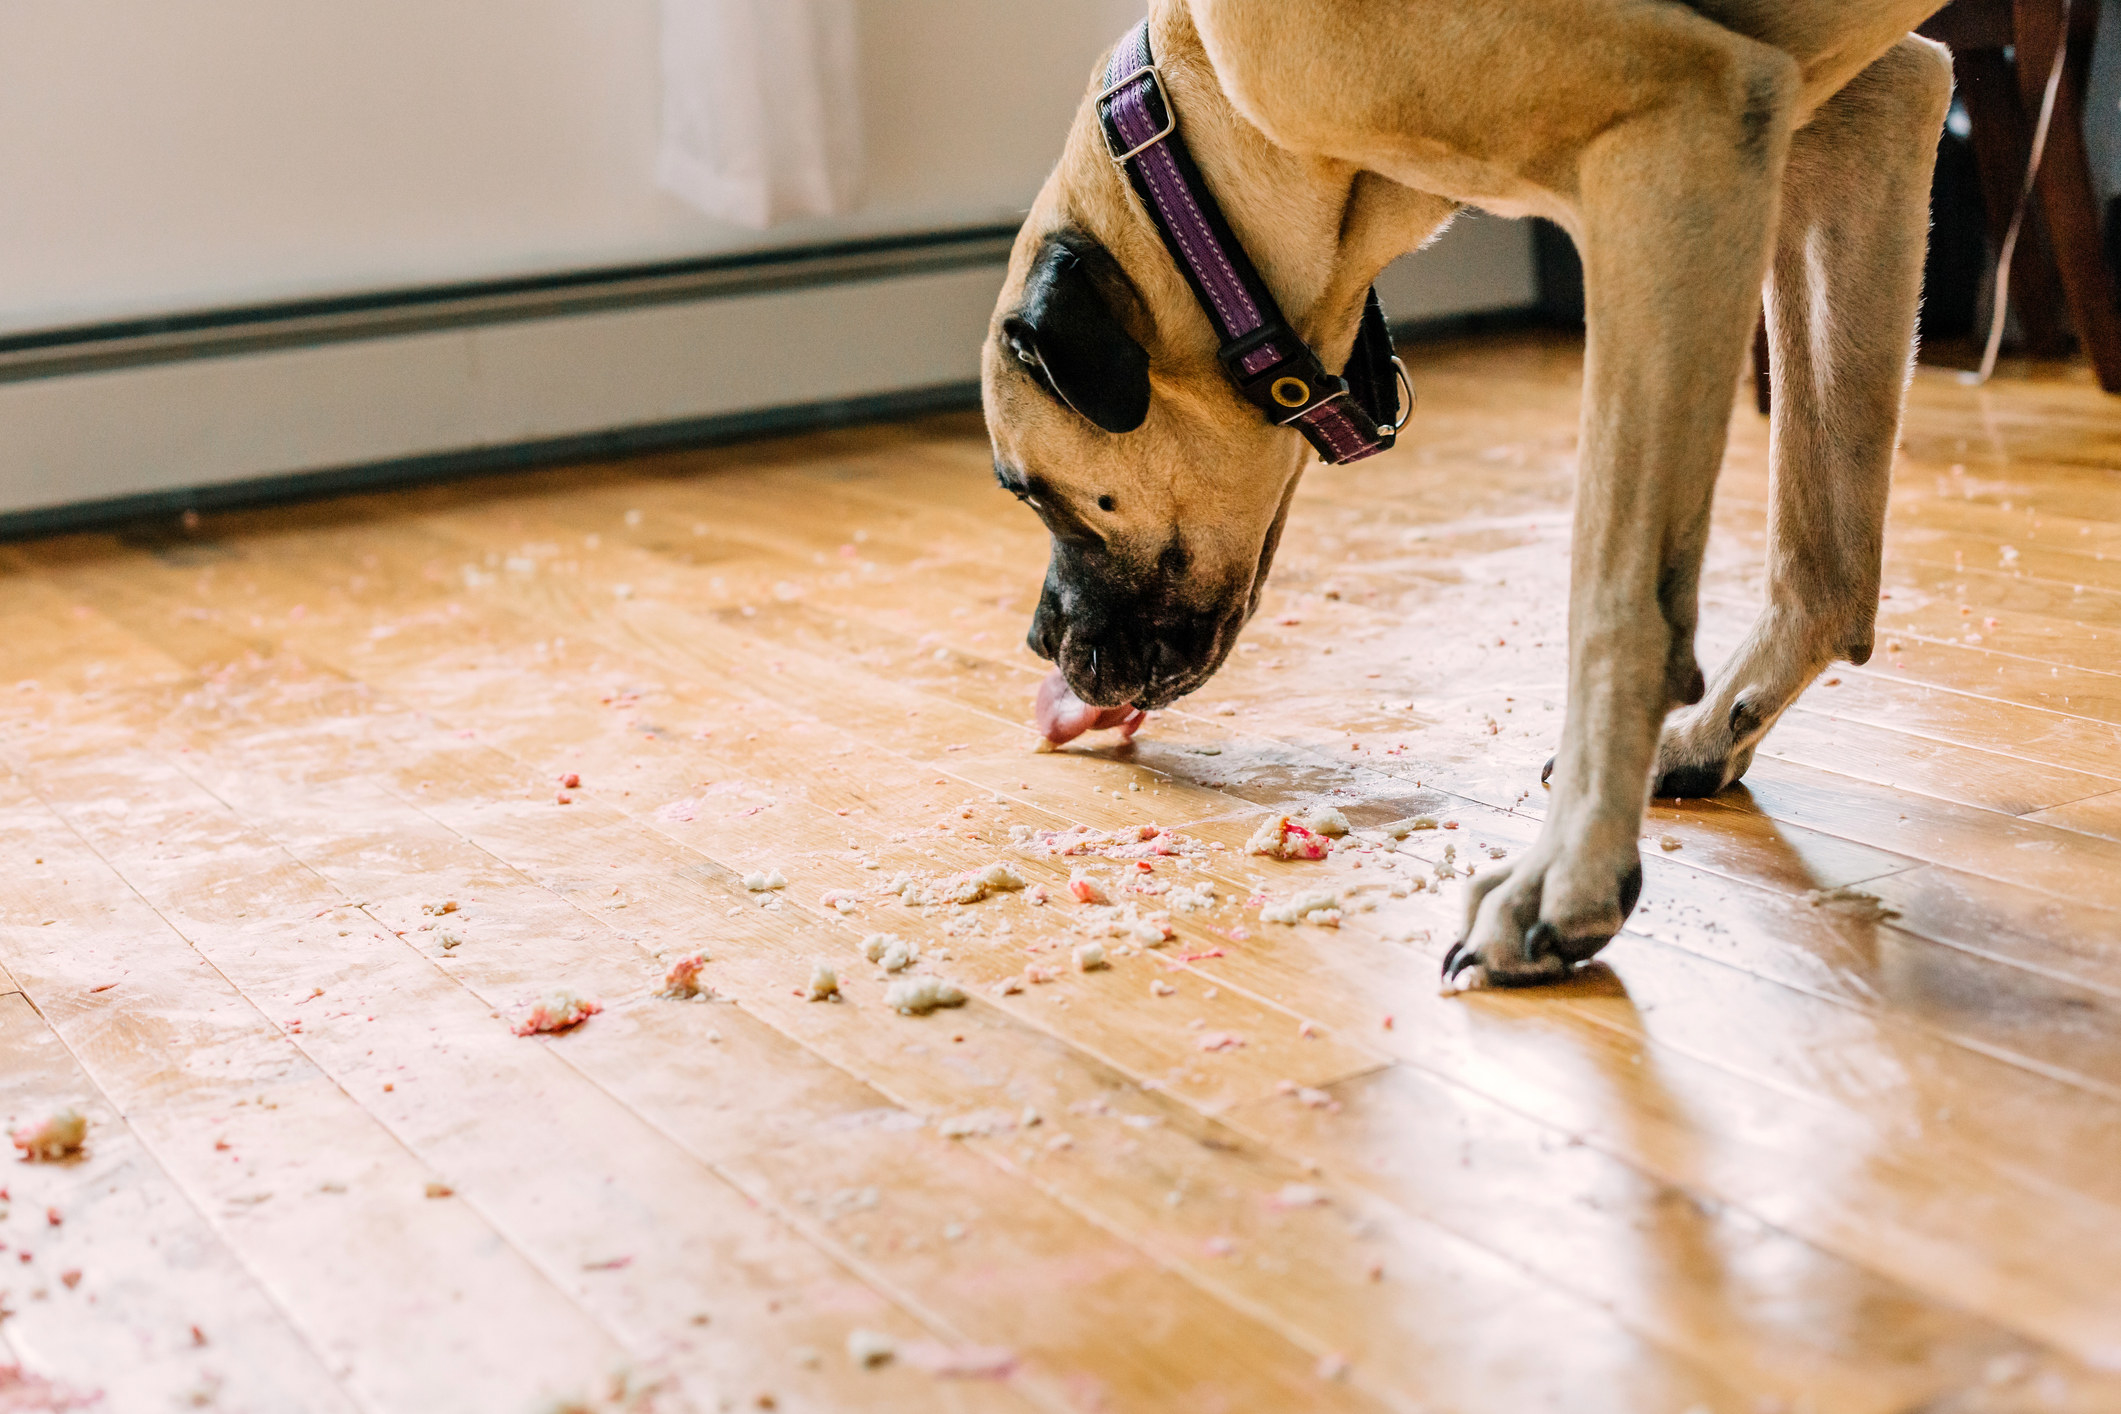 A dog eating crumbs of food off a dirty floor